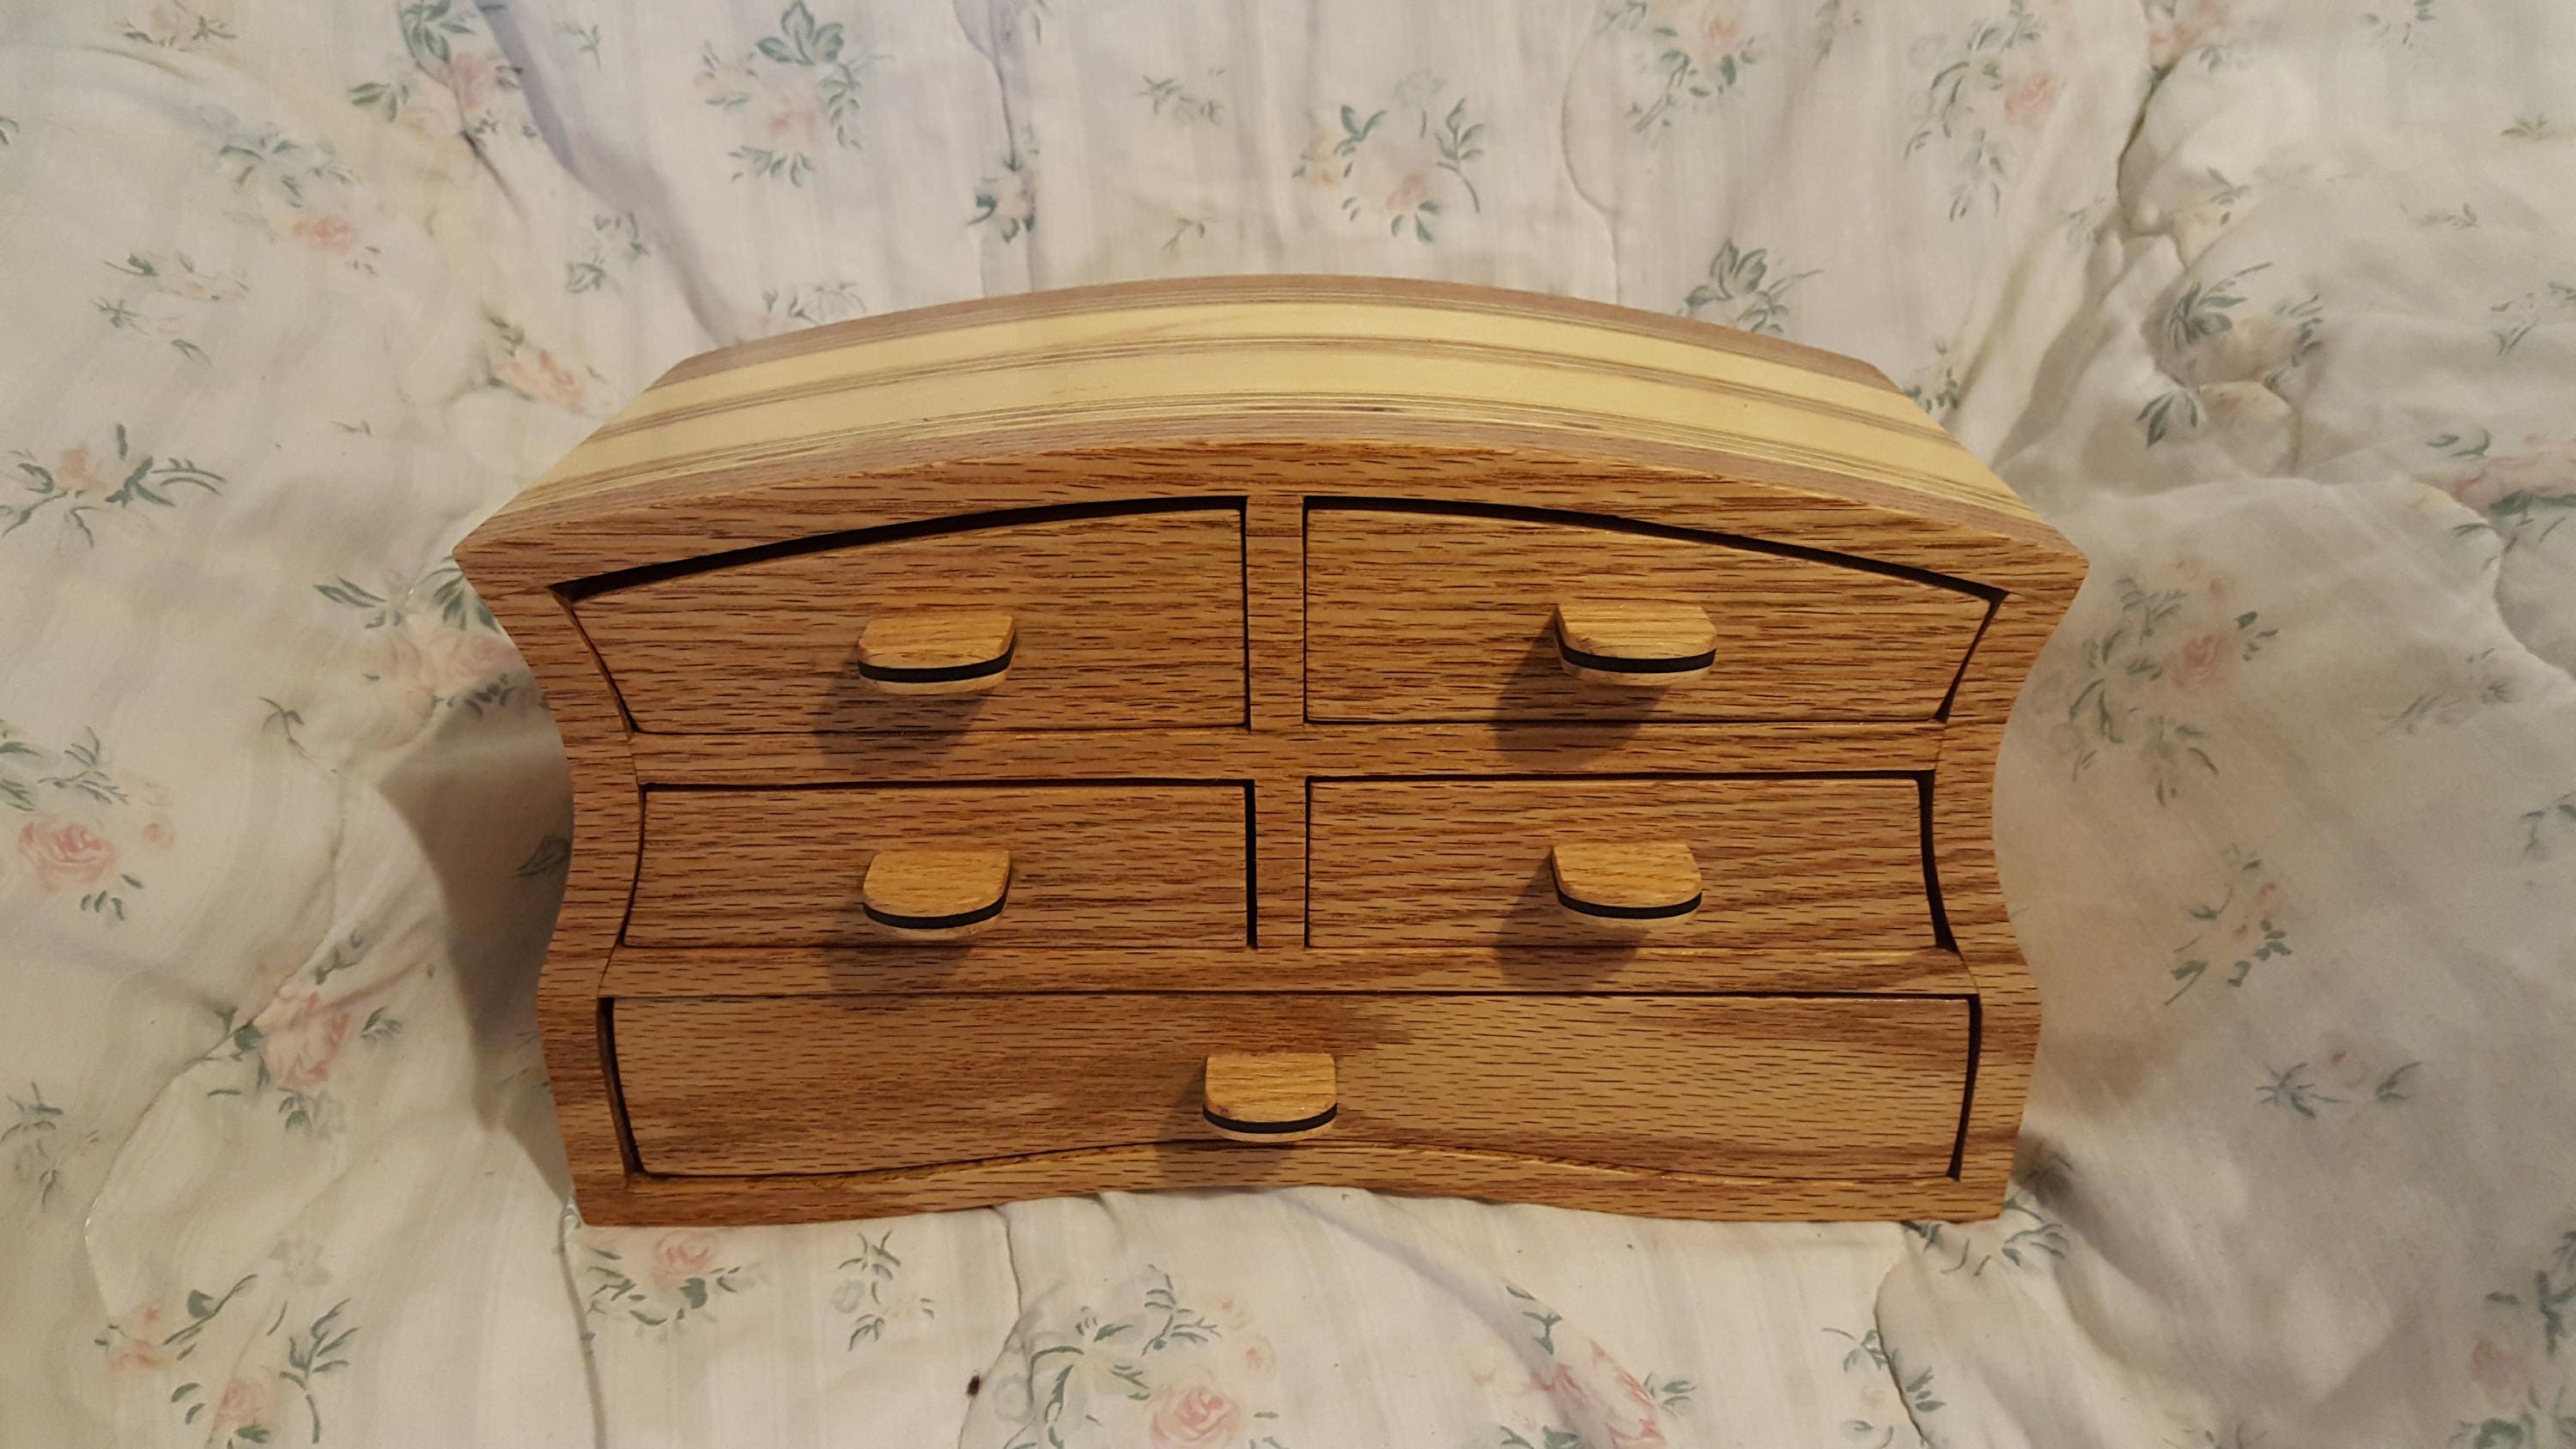 Bandsaw Box Made From Red Oak Pine Plywood And Ebony